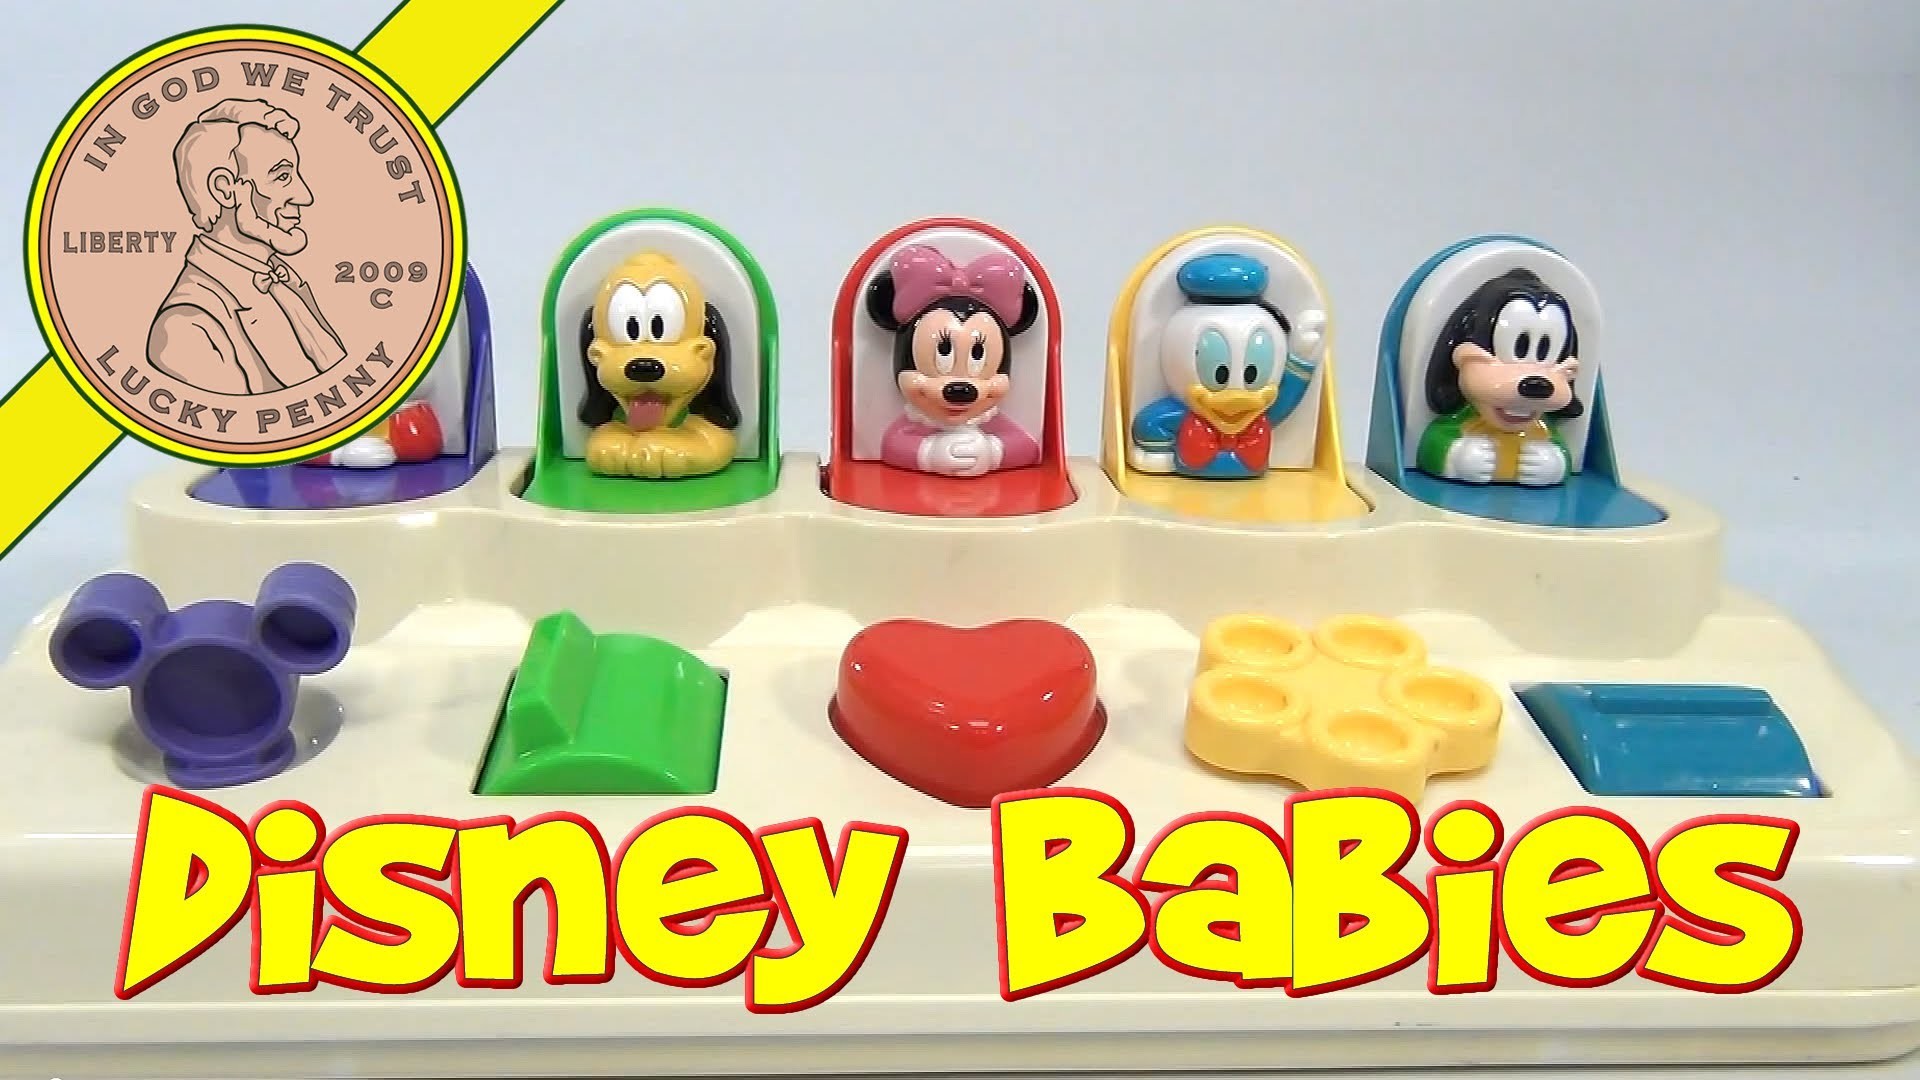 1920x1080 Mattel Disney Babies Poppin' Pals Toy - Mickey Mouse, Pluto, Minnie, Donald  Duck, Goofy - YouTube